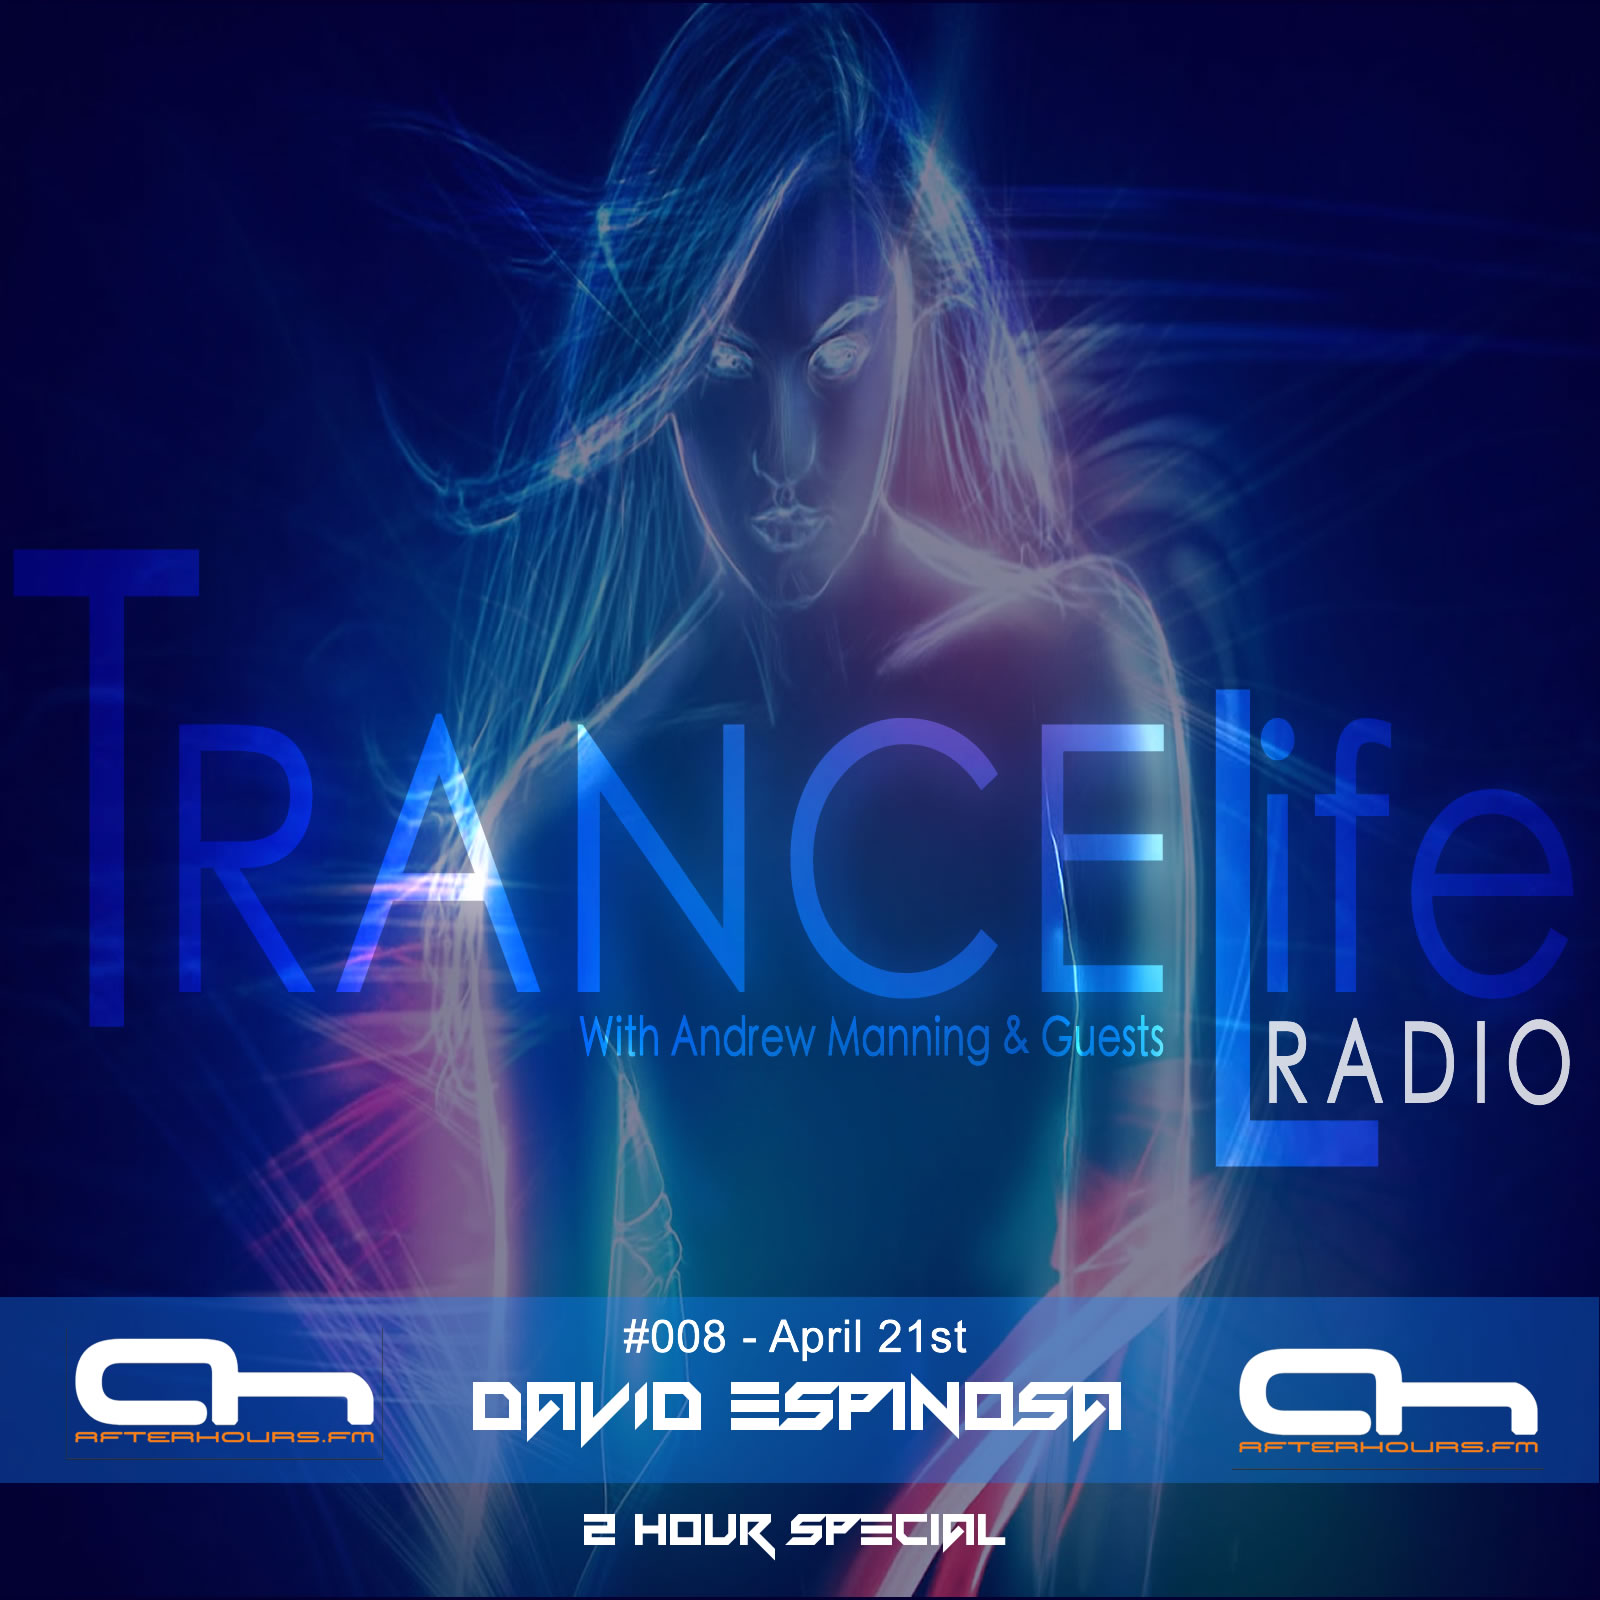 Andrew Manning TranceLife Radio 008 - 2 Hour Special With Guest Host David Espinosa